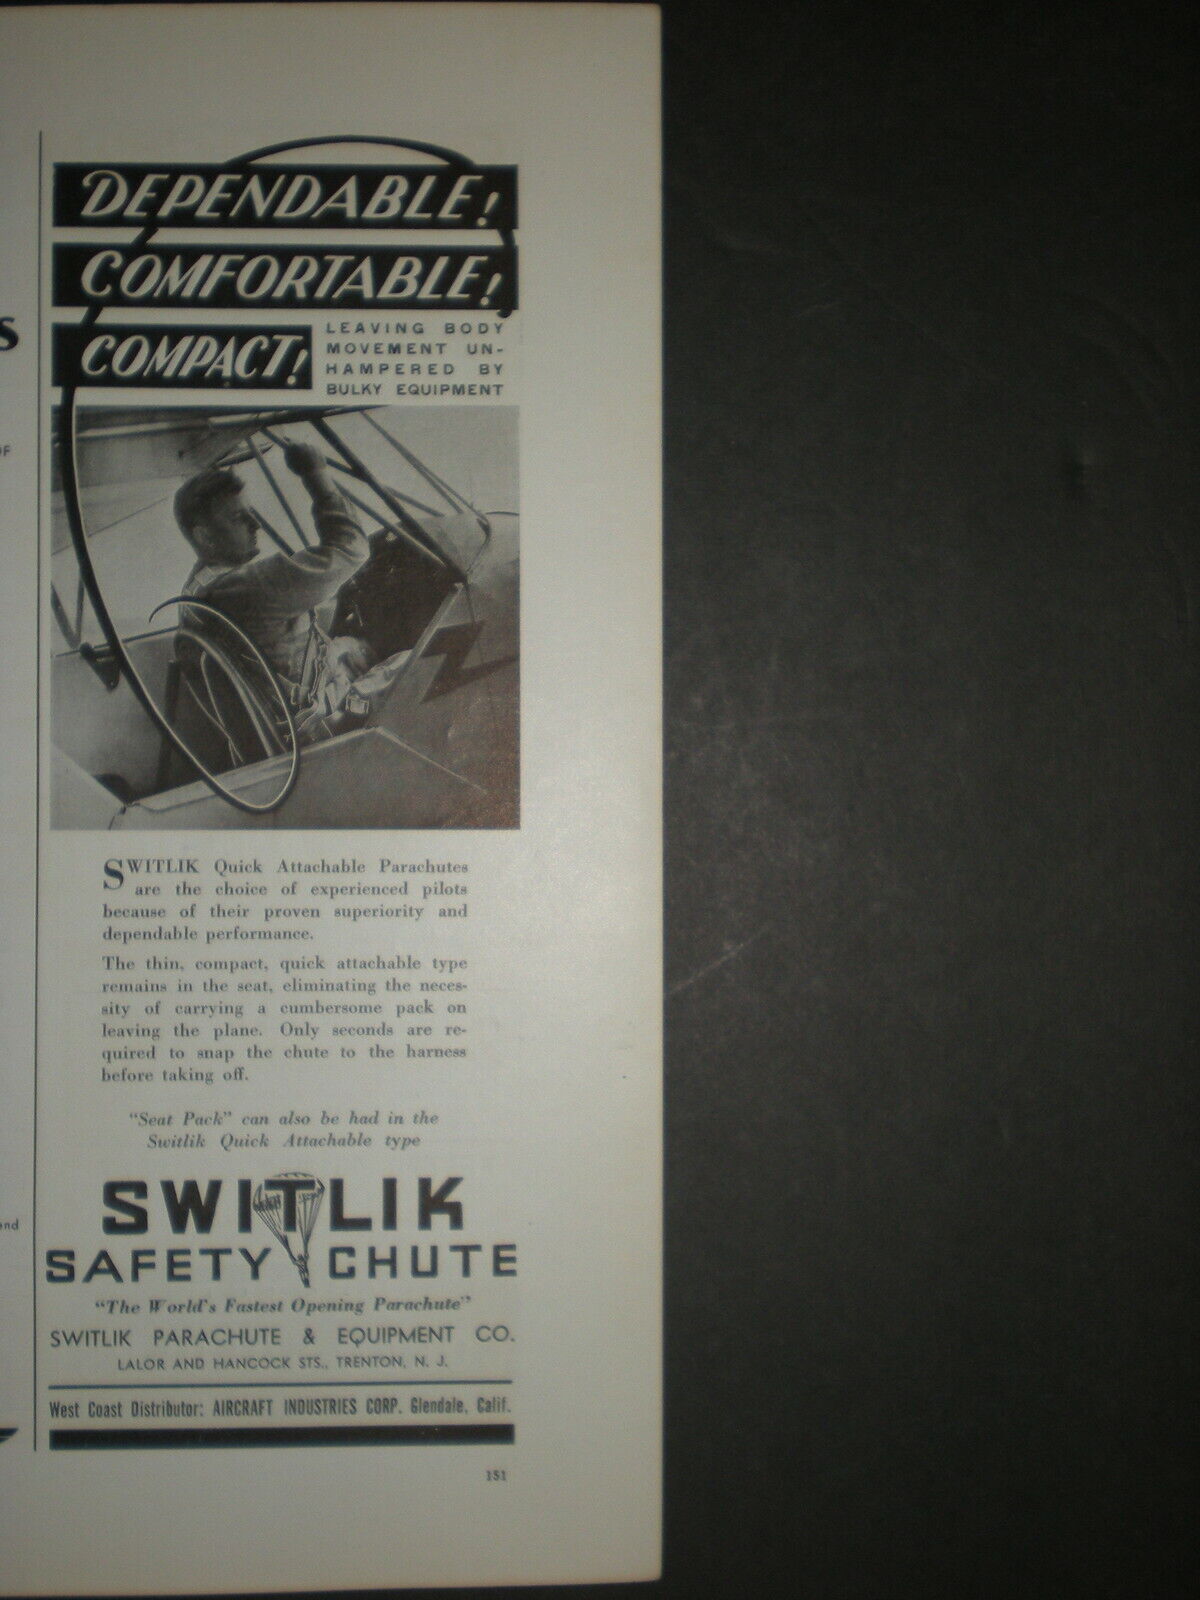 1940 SWITLIK QUICK ATTACHABLE PARACHUTE vintage SAFETY CHUTE Trade print ad